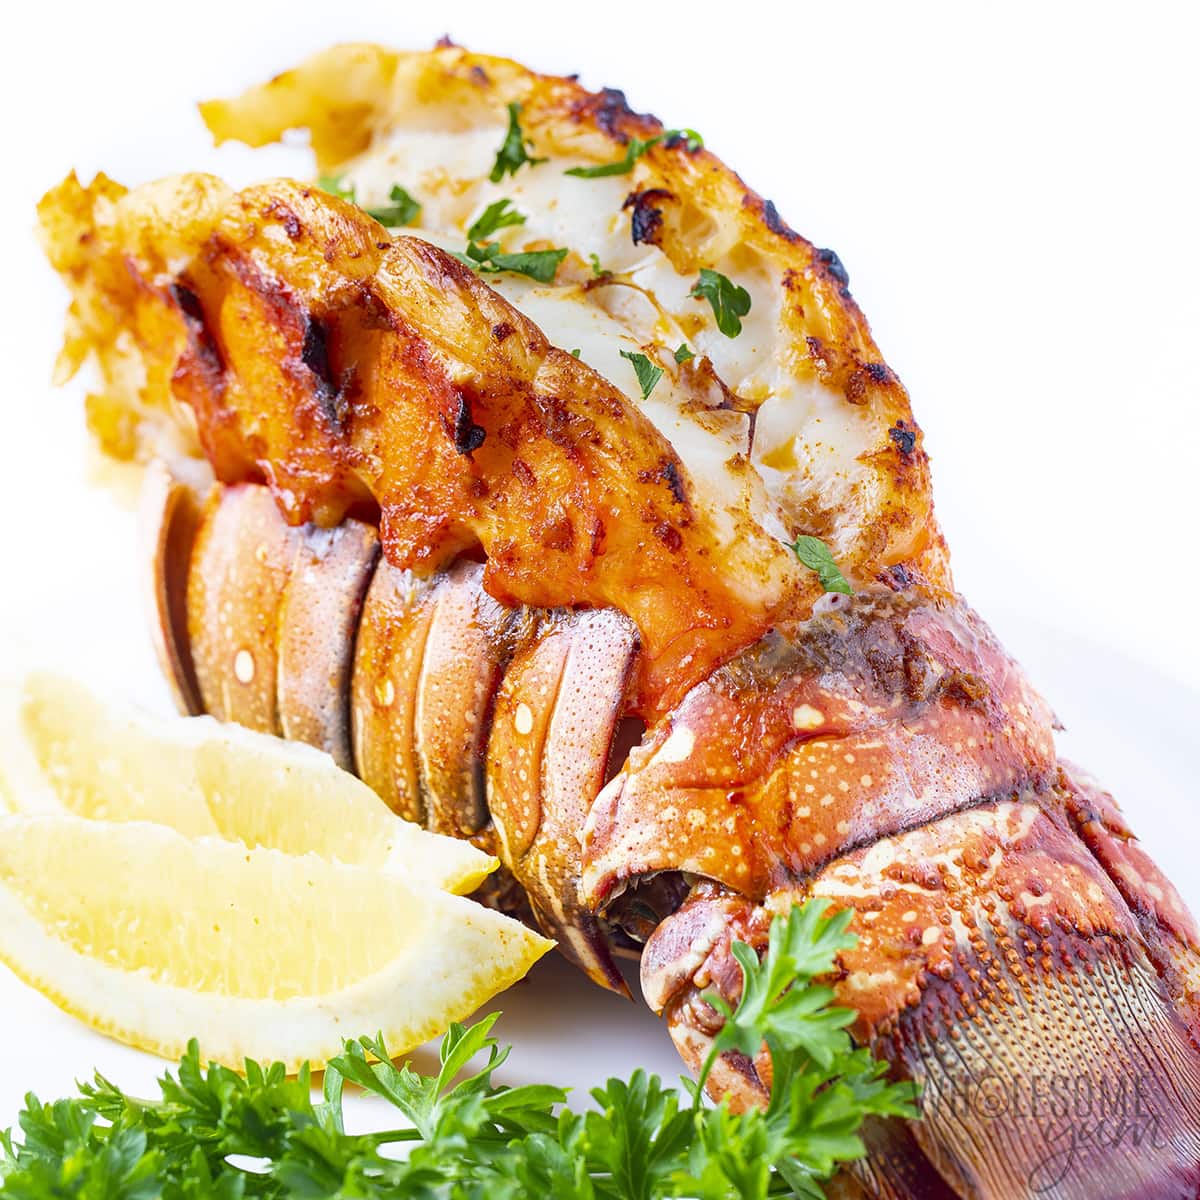 Finished lobster tail recipe with parsley and lemon.